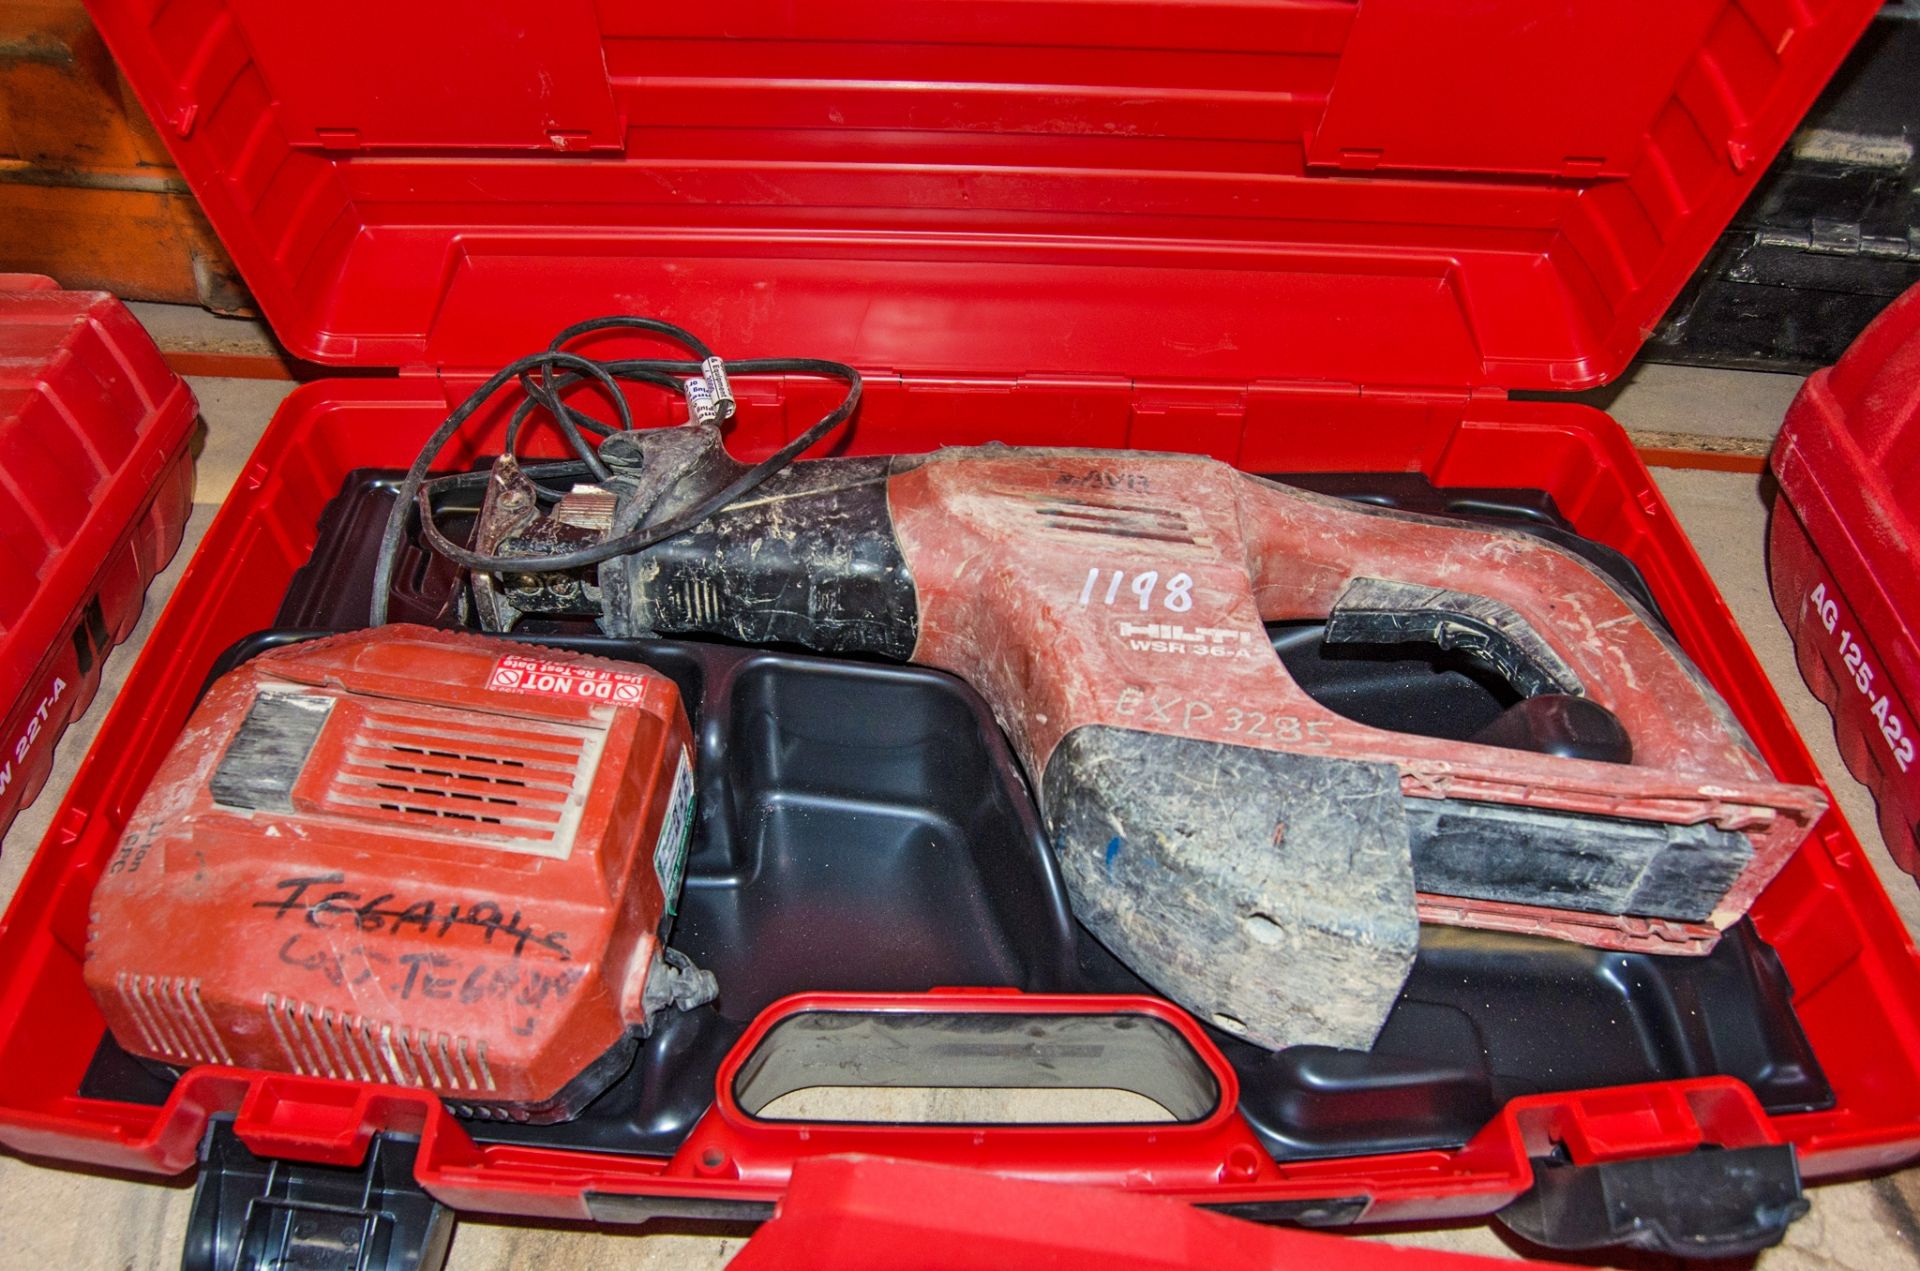 Hilti WSR36-A 36v cordless reciprocating saw c/w charger and carry case ** No battery ** EXP3285